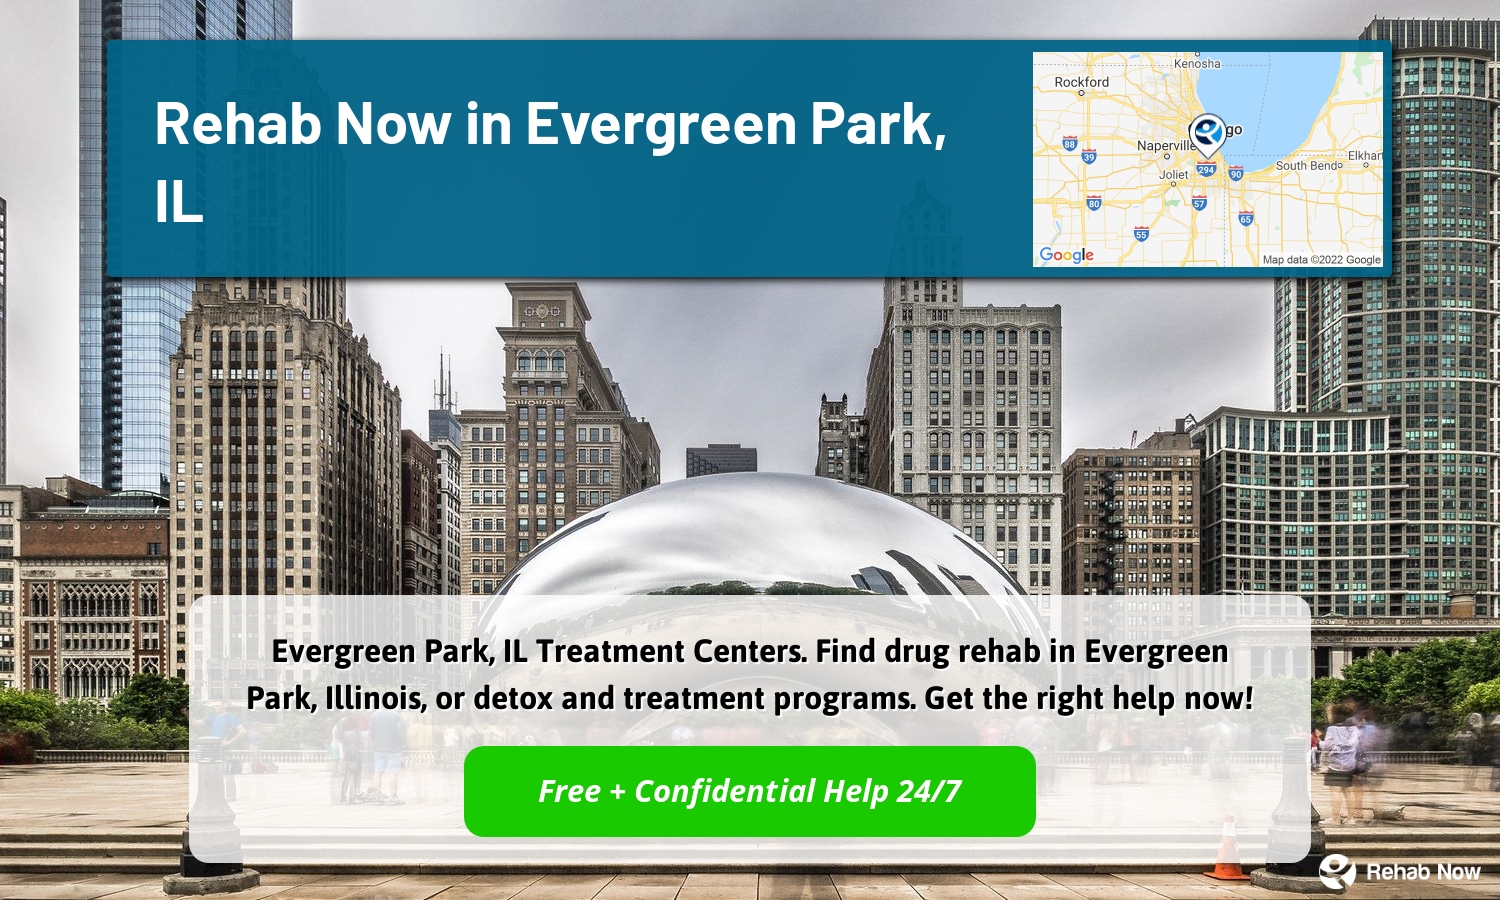 Evergreen Park, IL Treatment Centers. Find drug rehab in Evergreen Park, Illinois, or detox and treatment programs. Get the right help now!